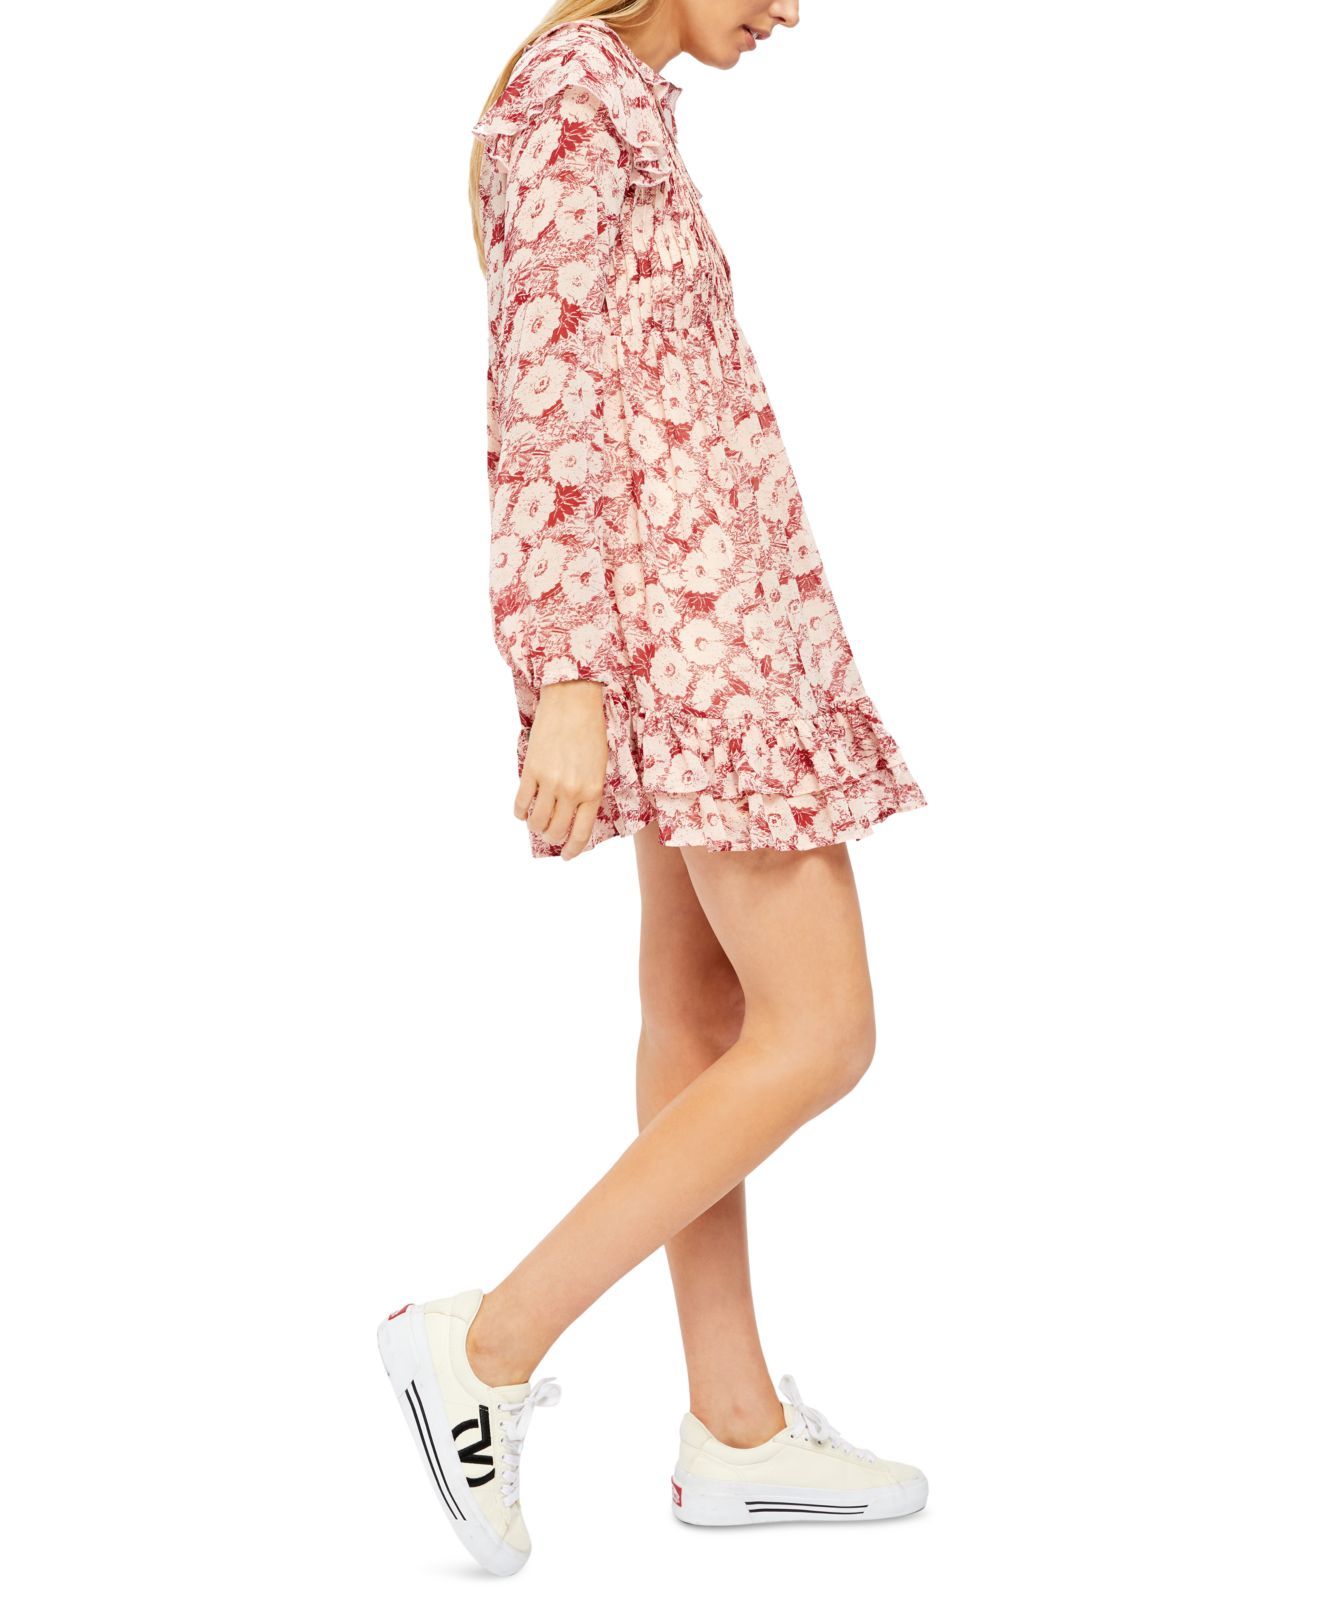 Color: Pinks Size Type: Regular Size (Women's): S Neckline: Round Neck Pattern: Floral Sleeve Length: Long Sleeve Style: Shift Occasion: Any Occasion Dress Length: Short Material: 100% Polyester Zipper: None